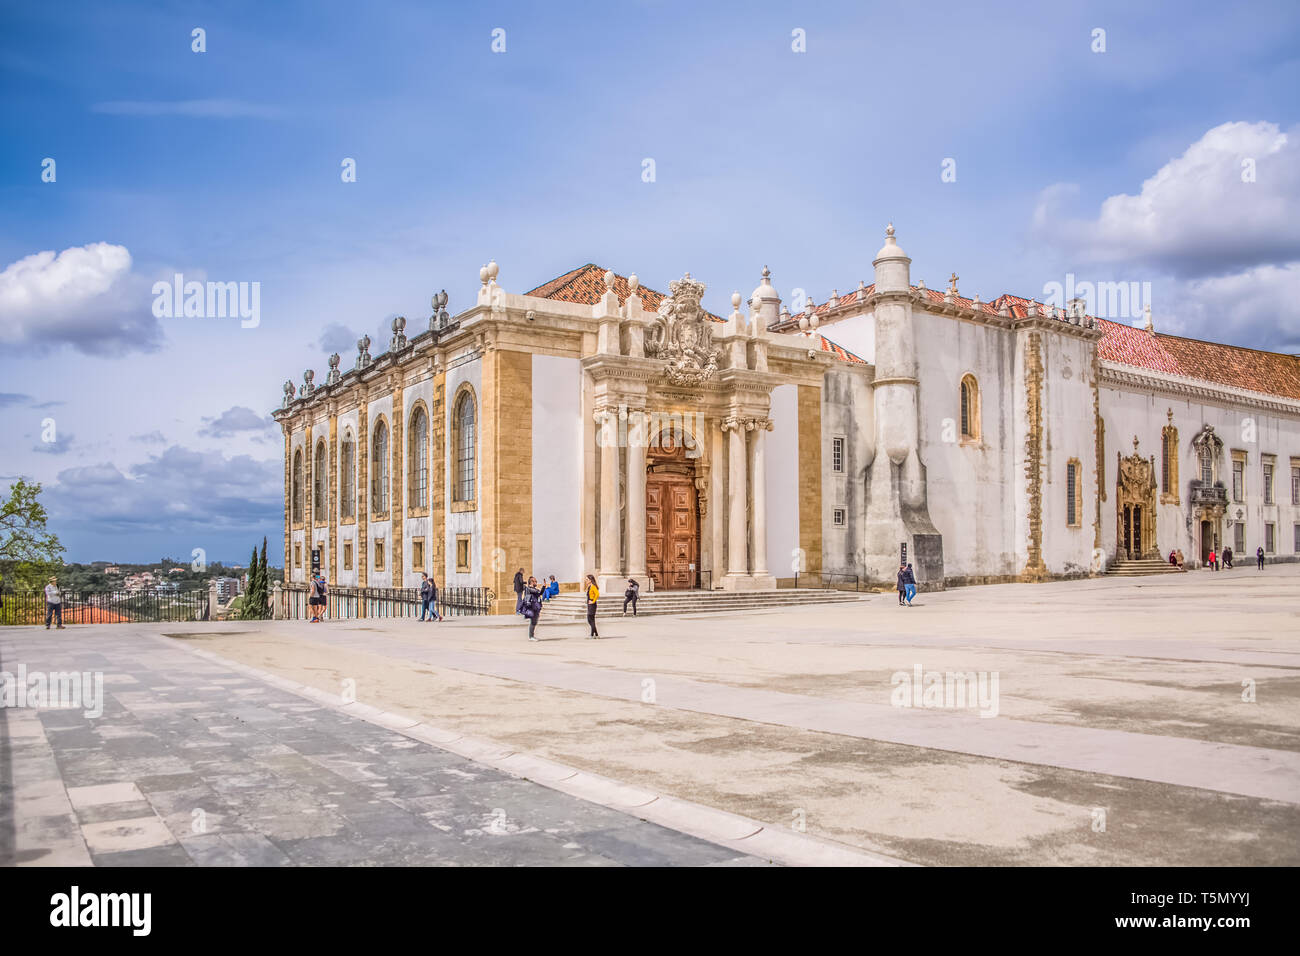 Coimbra / Portugal - 04 04 2019 : View of plaza of University of Coimbra, with tourists and building of the Joanina Library, in Coimbra, Portugal Stock Photo